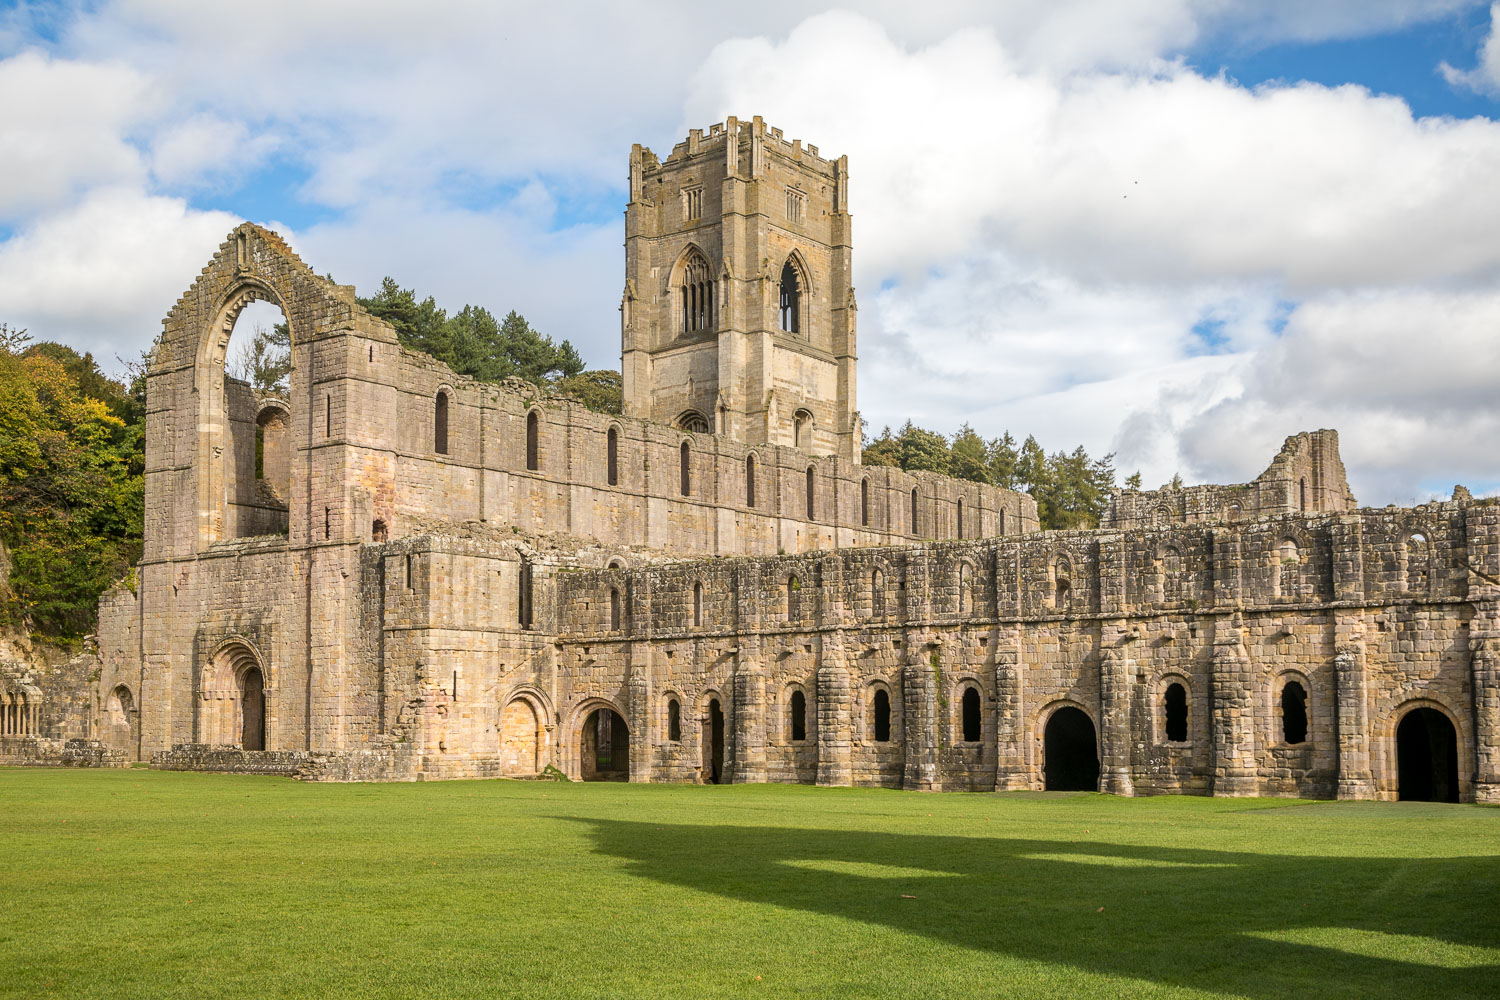 Huby's Tower, Fountains Abbey